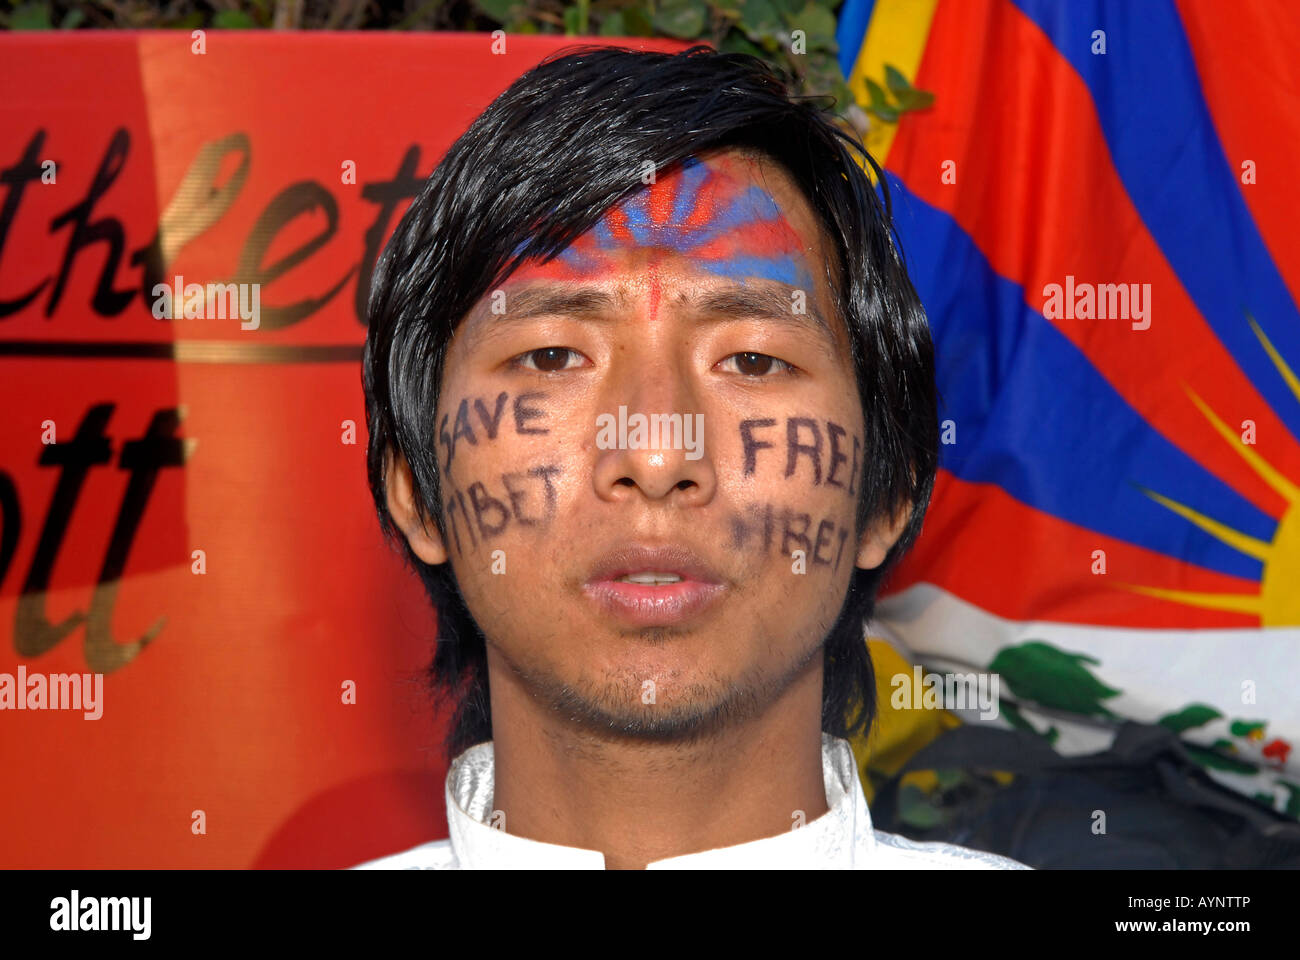 A man with Free Tibet and the Tibetan flag painted on his face taking part in a demonstration during Tibetan National Uprising Day in Tel Aviv Israel Stock Photo